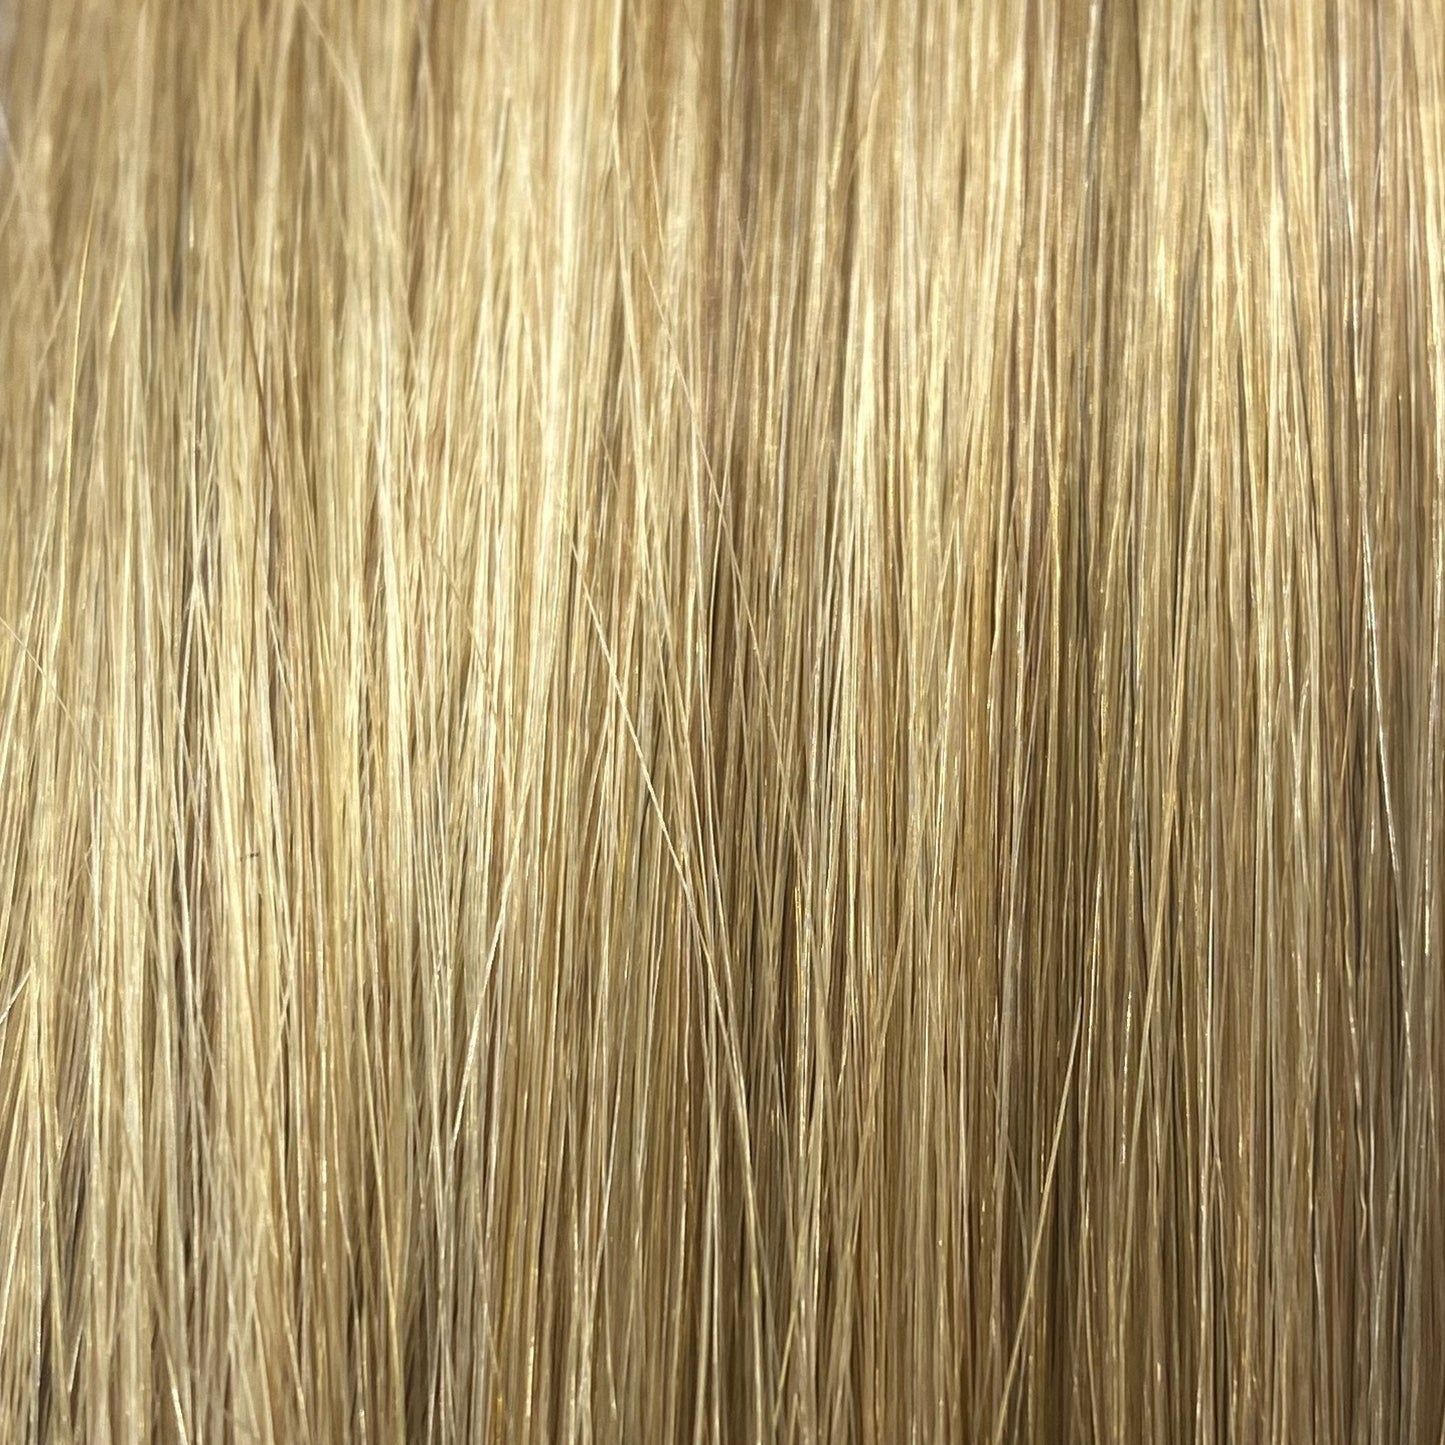 Fusion hair extensions #12/DB2 - 50cm/20 inches - Copper Golden Blonde/Light Golden Blonde Highlight Fusion Euro So Cap 